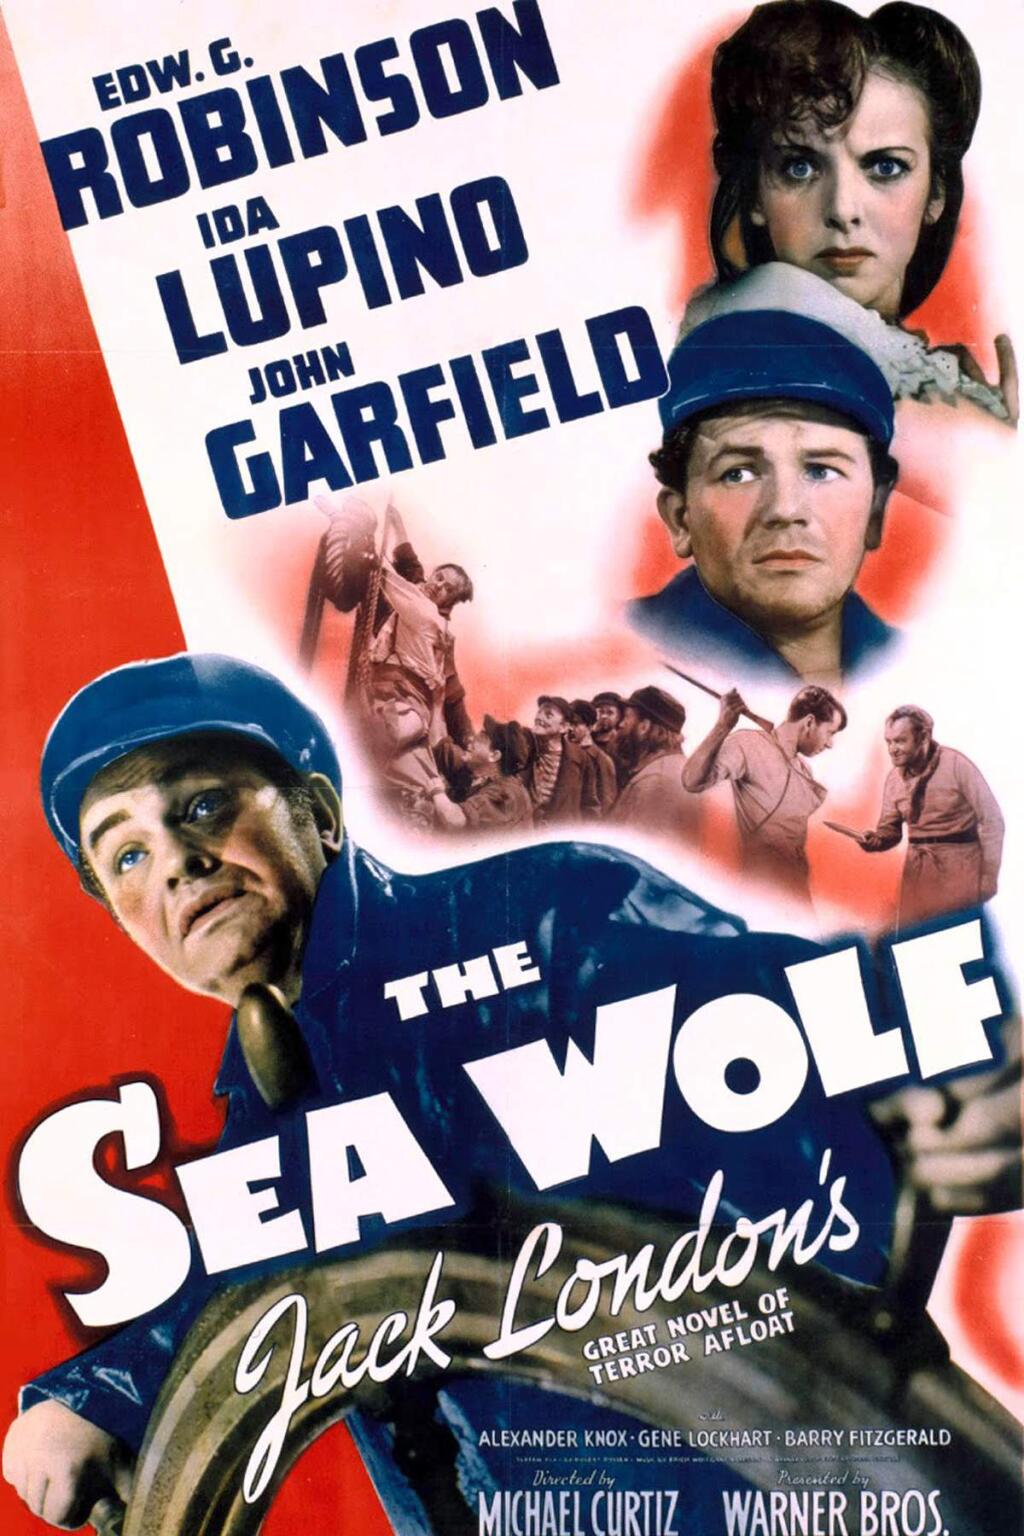 Jack London's novel 'The Sea Wolf' was made into a feature film in 1941, starring Edward G. Robinson, Ida Lupino and John Garfield.